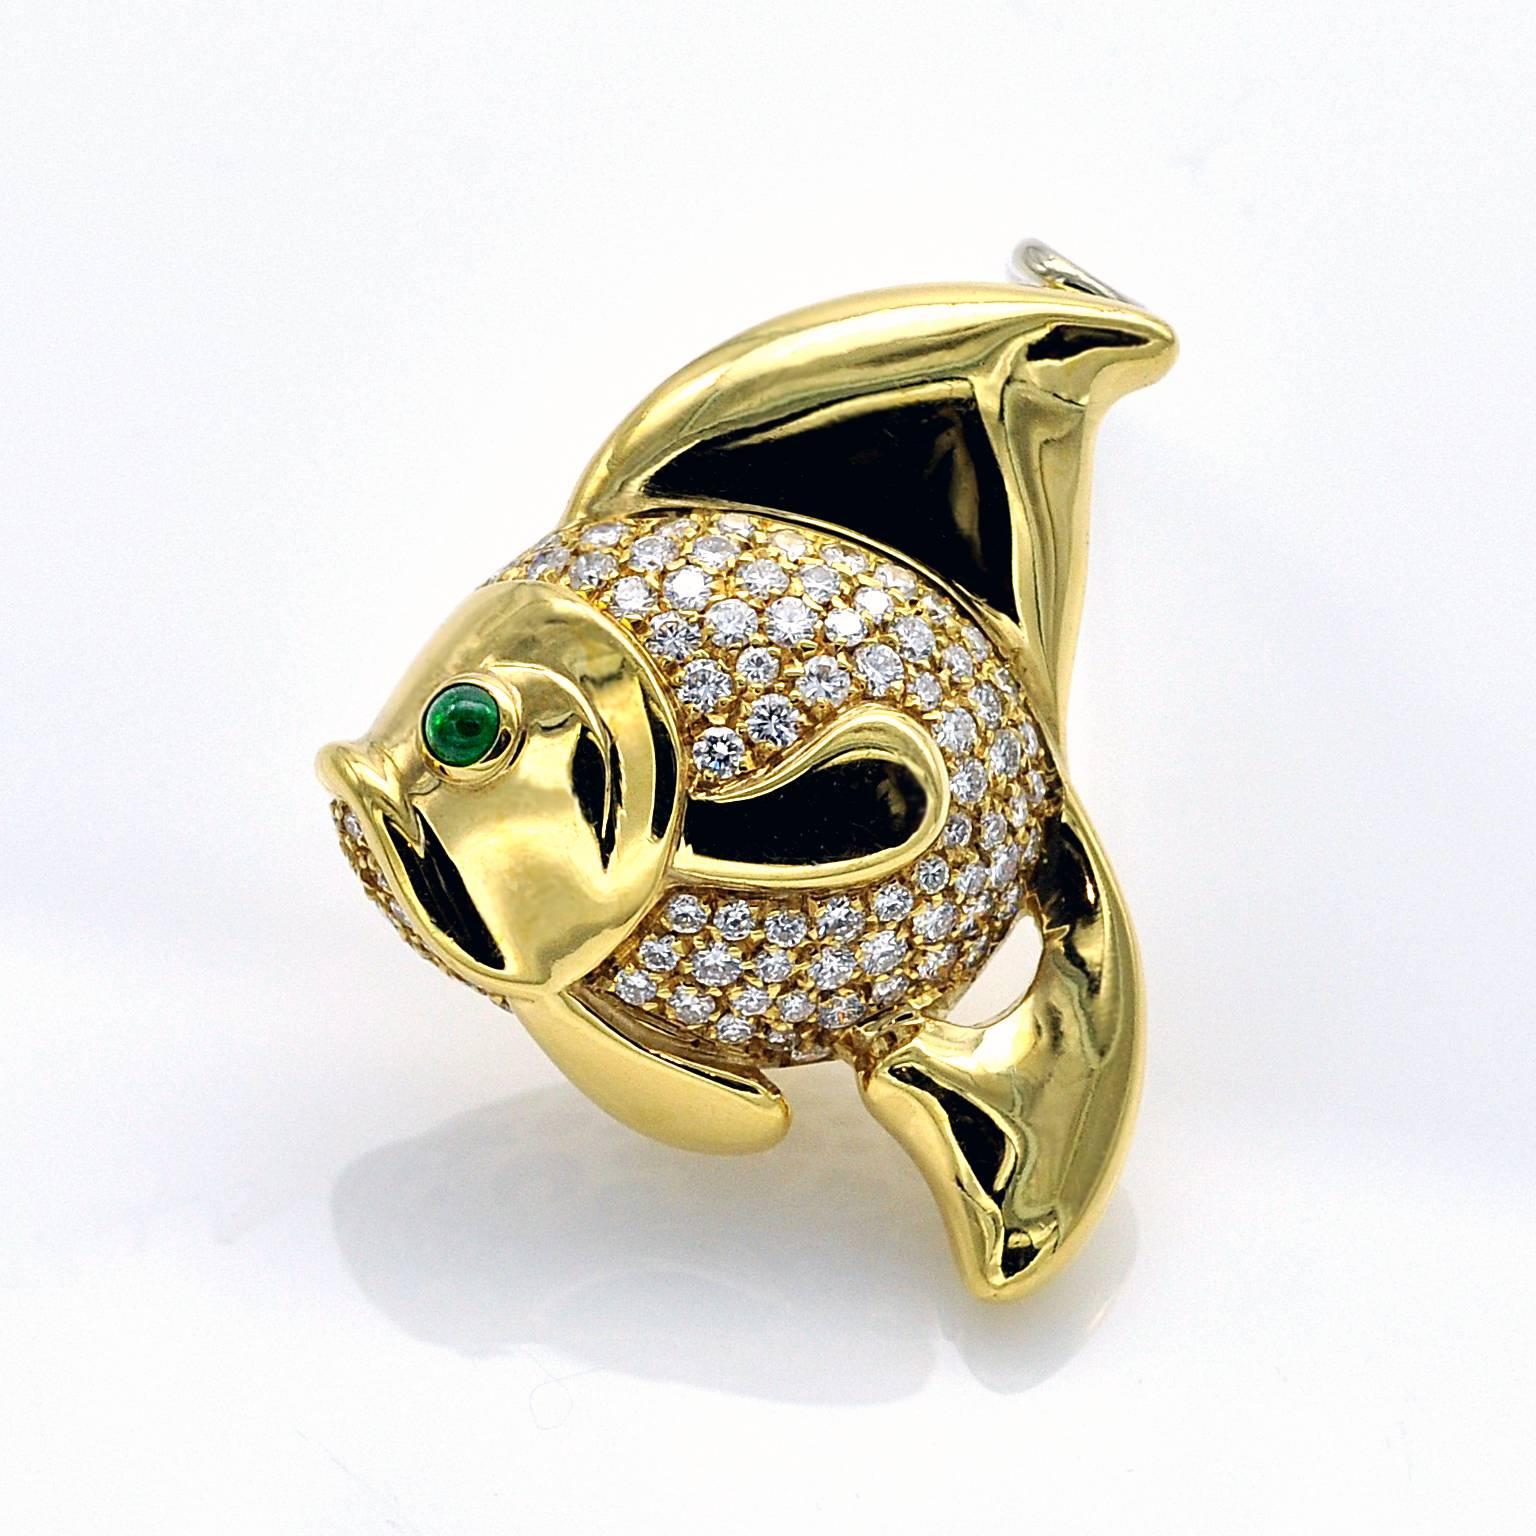 Exquisite  brooch - necklace !  the Fish is nice and rounded and ... so precious

The brooch is 18 kt gold, the body of the fish is pave set with high quality diamonds, with a round emerald cabochon for the eye. 

French state hallmark 